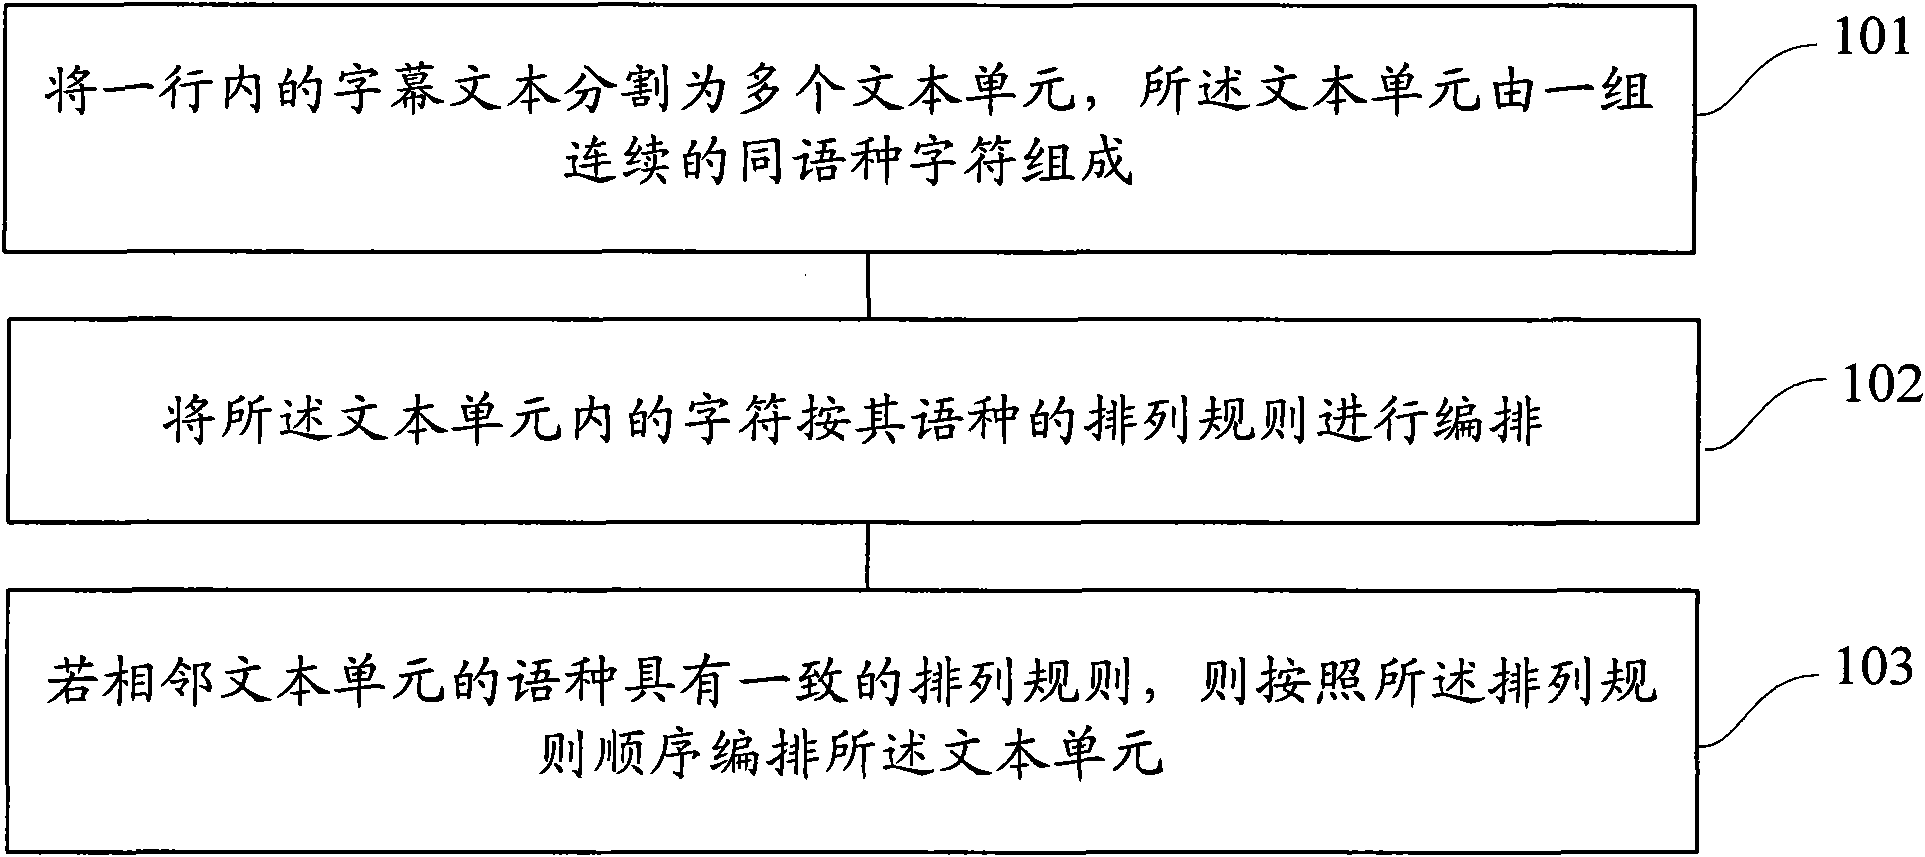 Method and device for arranging multi-language captions